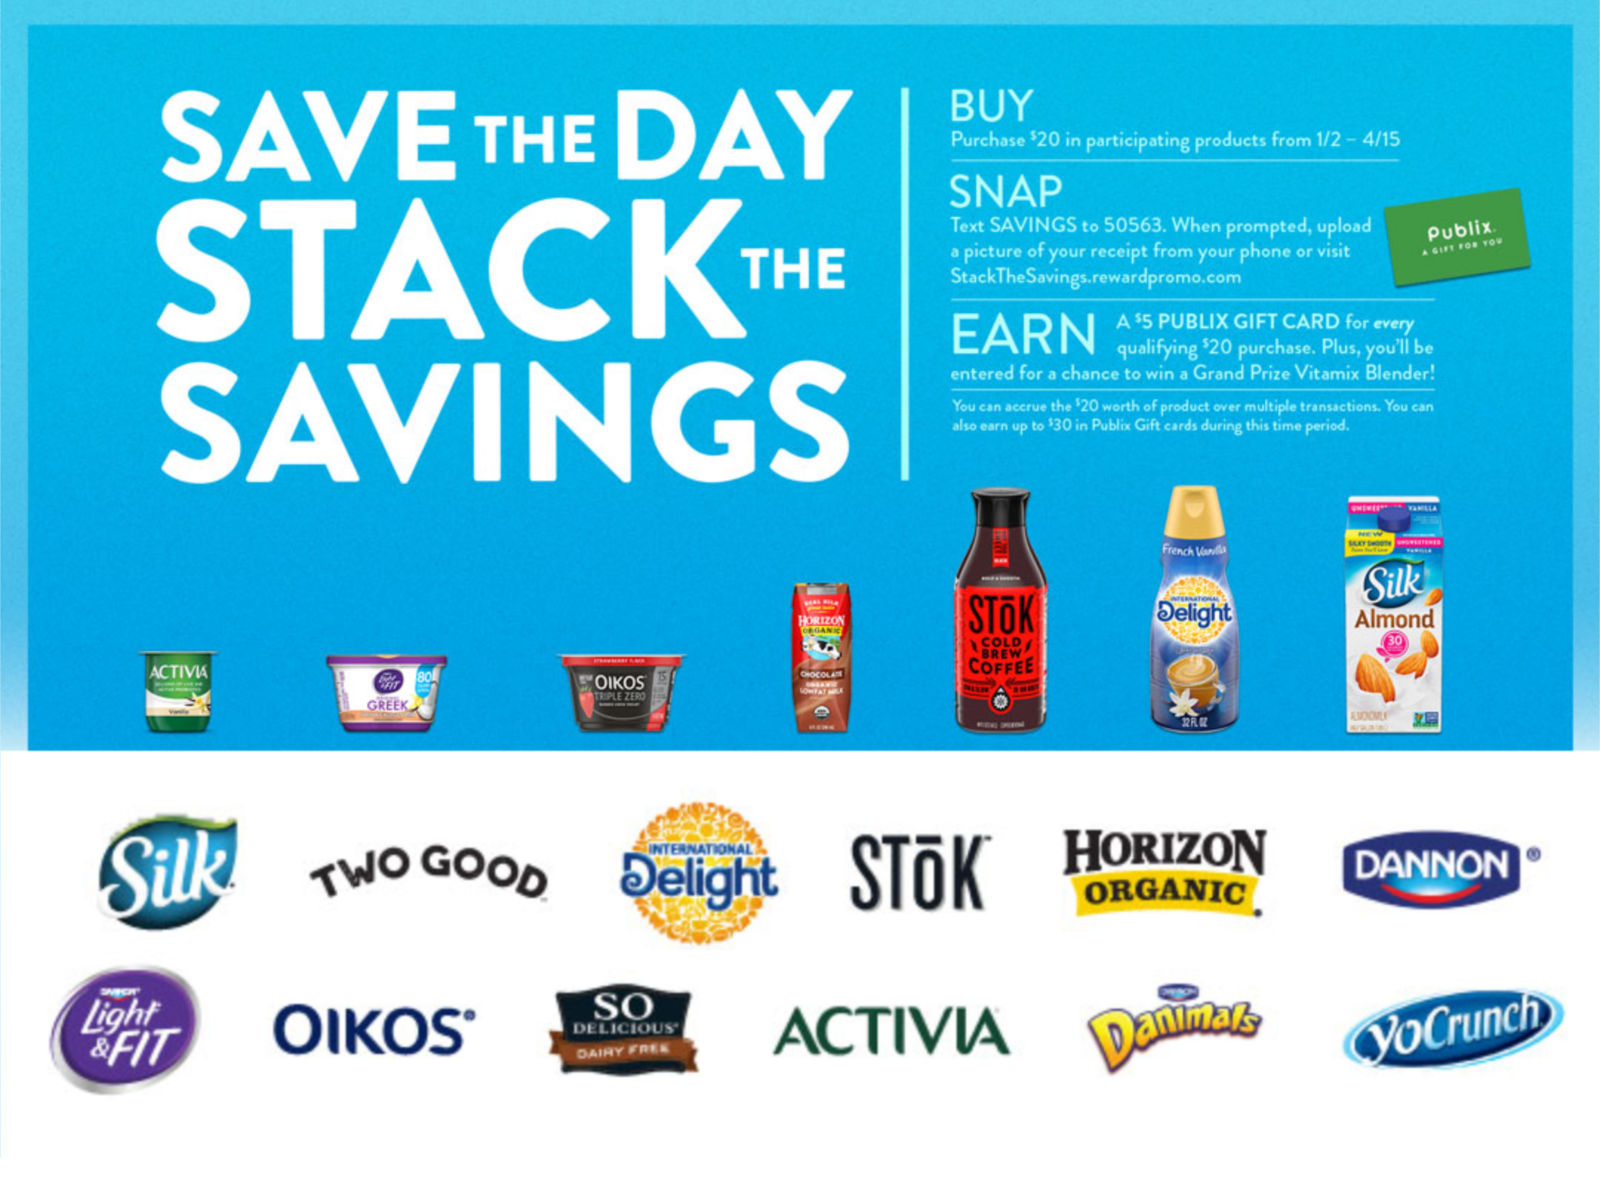 New Deals To Earn Your Gift Card(s) As Part Of The Save The Day Stack The Savings Rebate!